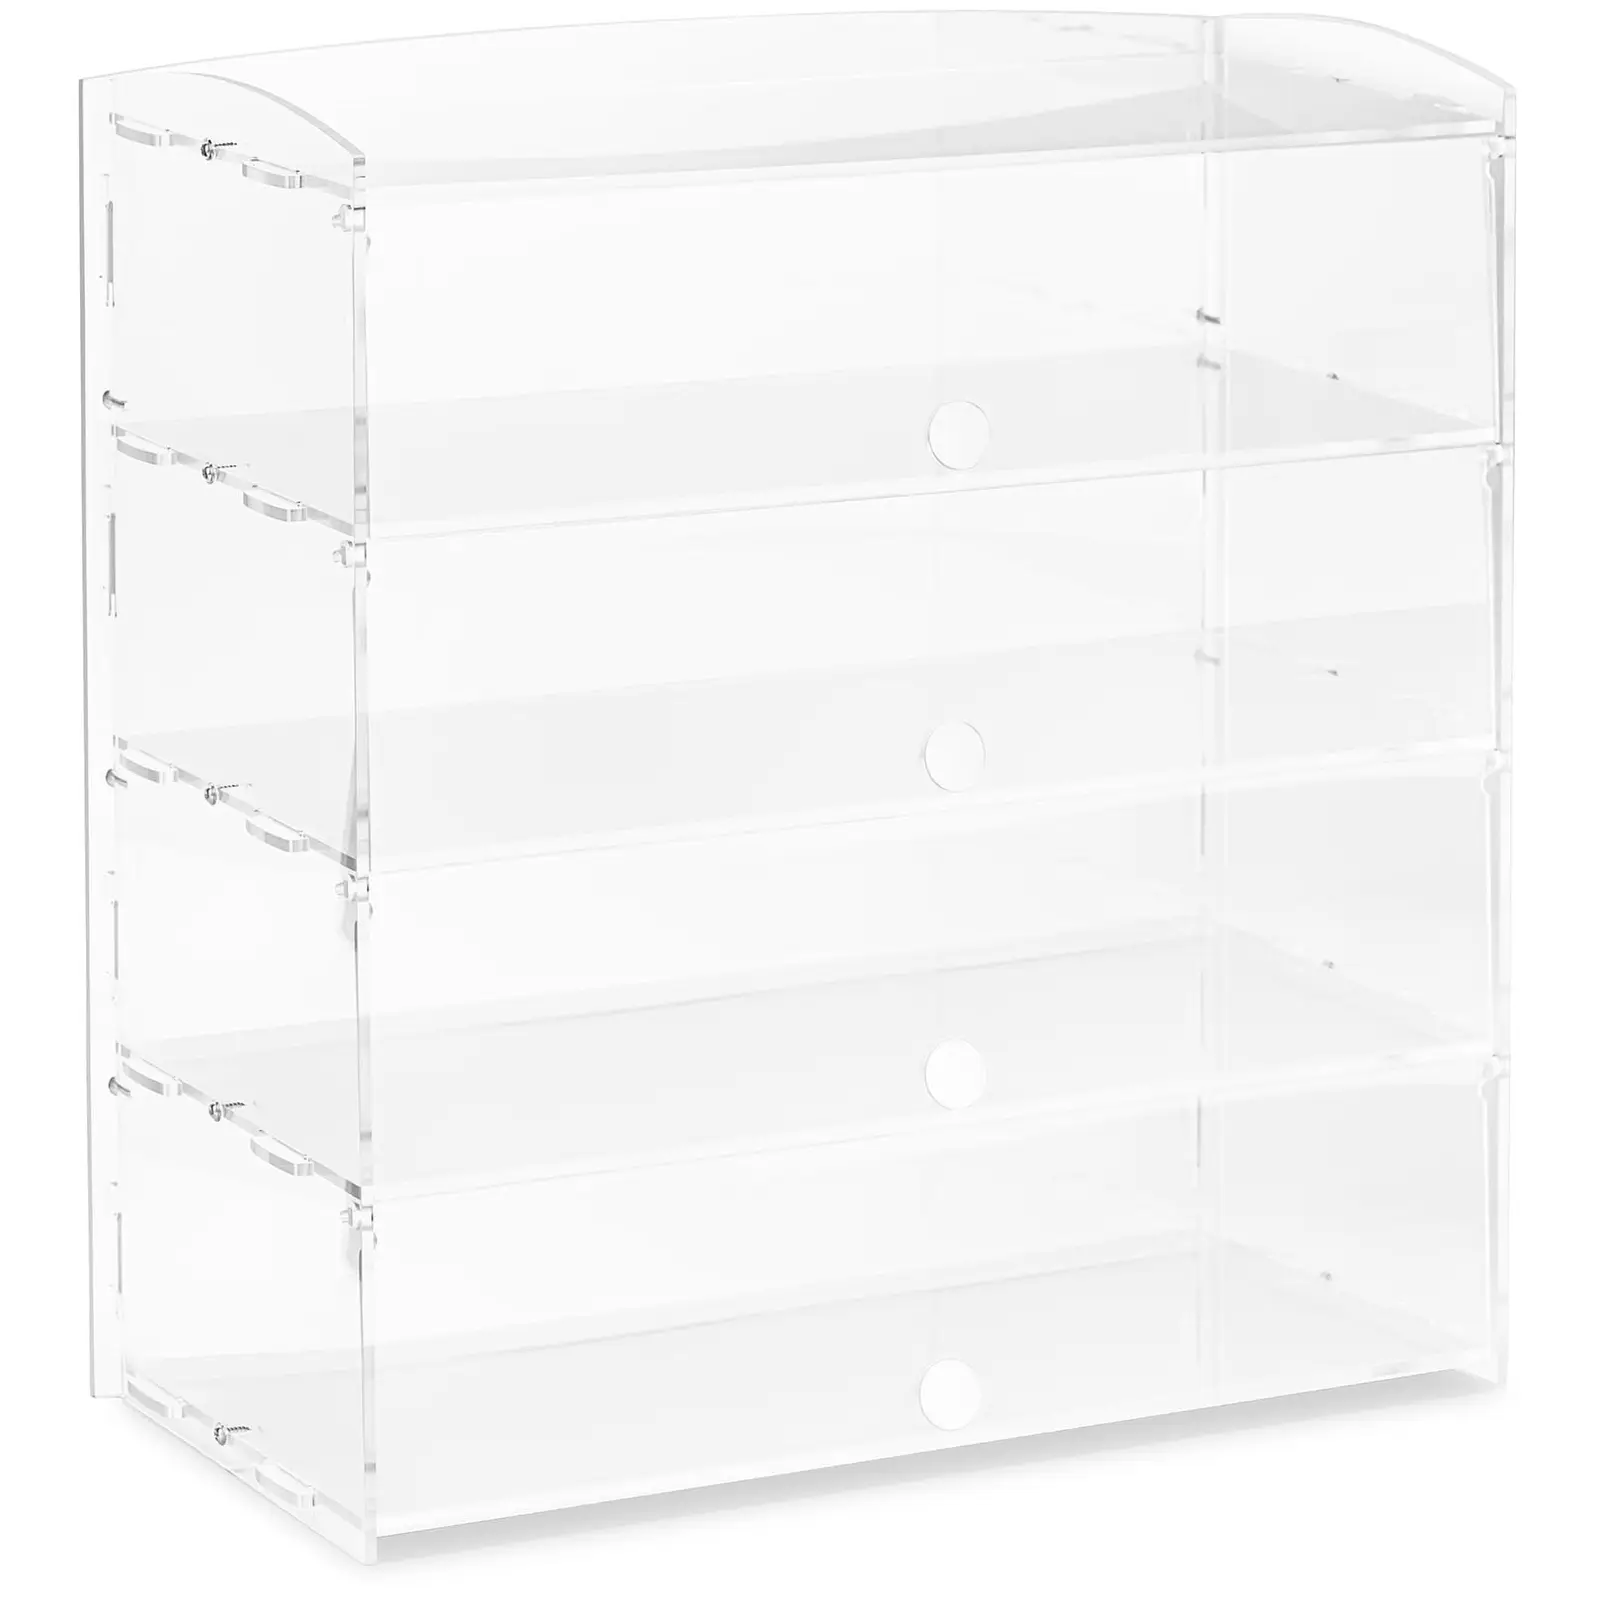 Cake Display Cabinet - small - Acrylic - 4 Shelves - Royal Catering